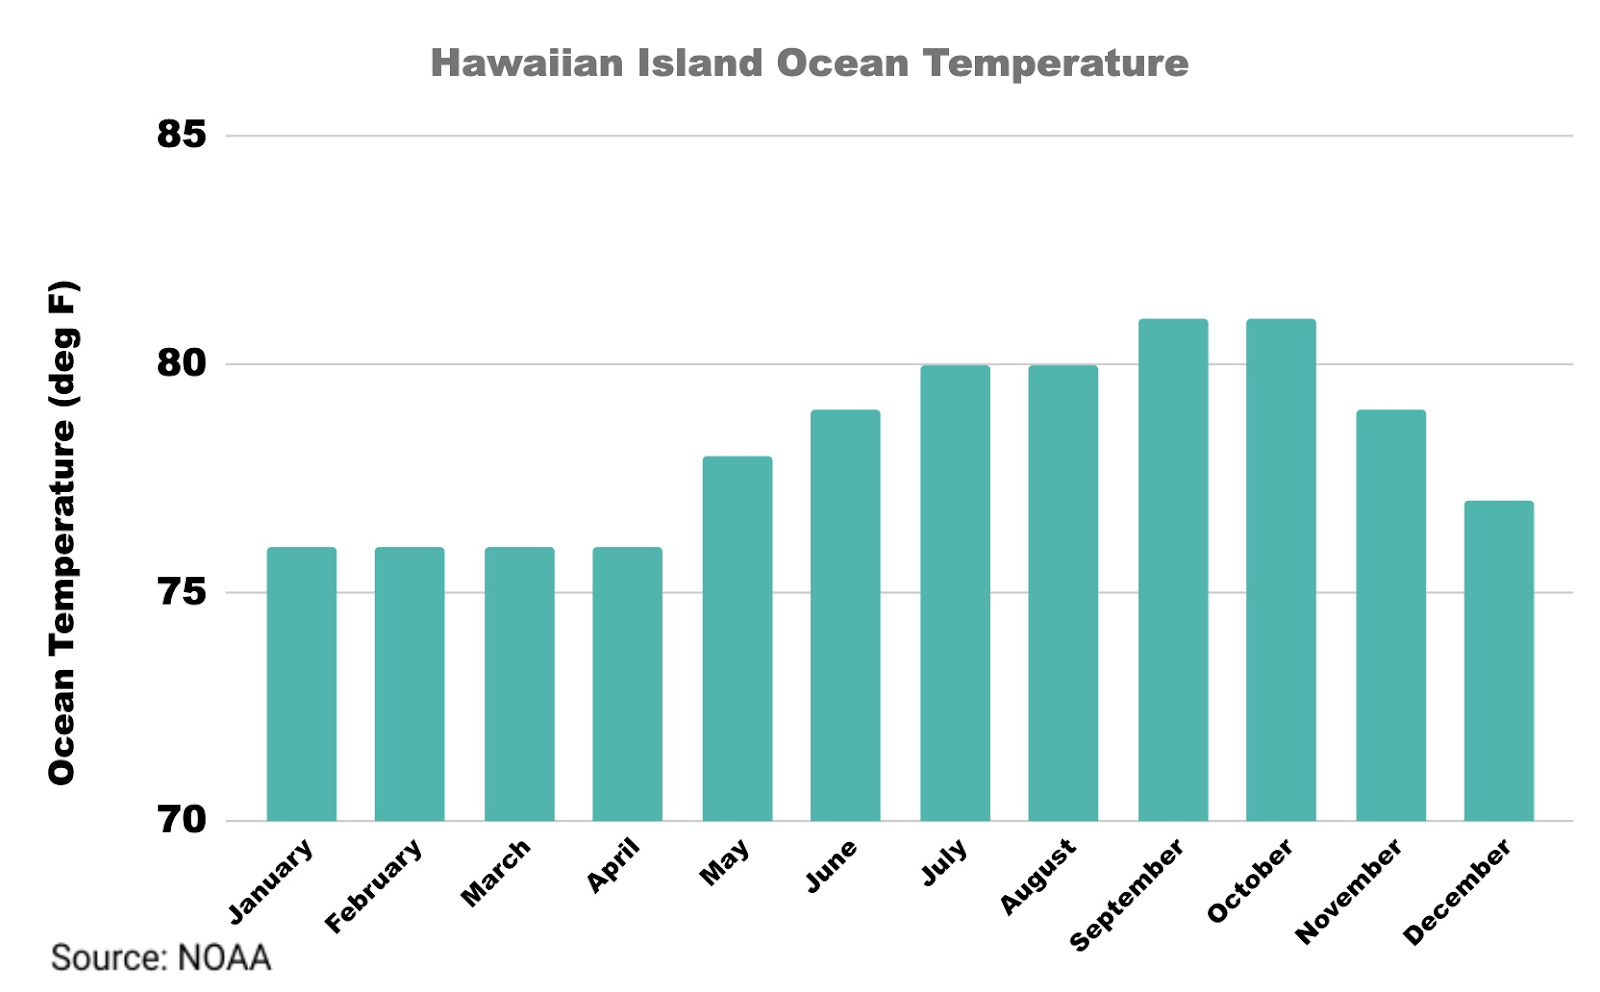 chart showing Hawaiian ocean temperatures throughout the year